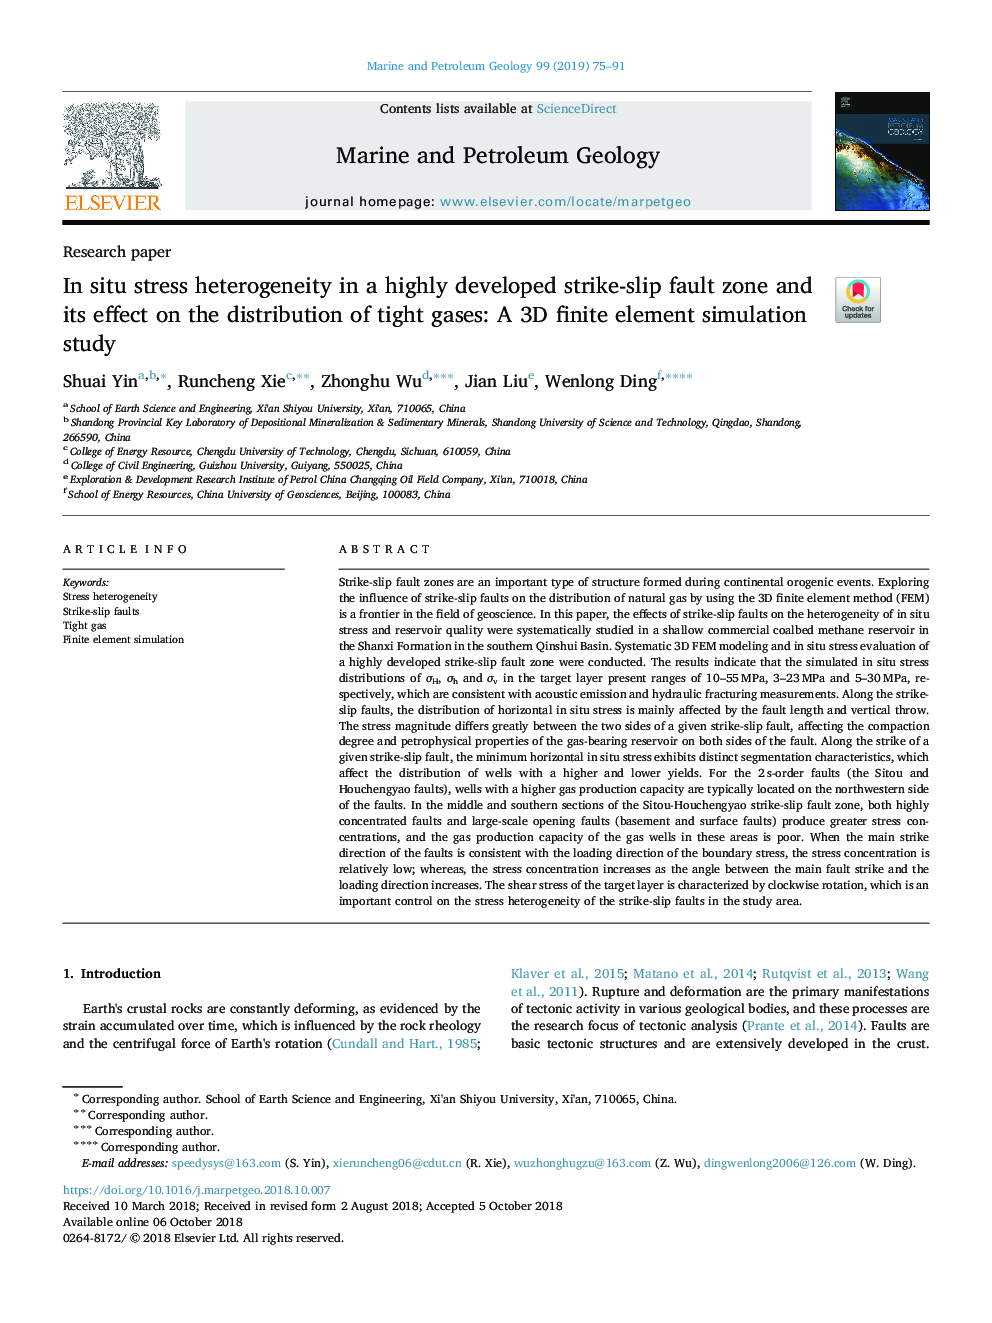 In situ stress heterogeneity in a highly developed strike-slip fault zone and its effect on the distribution of tight gases: A 3D finite element simulation study